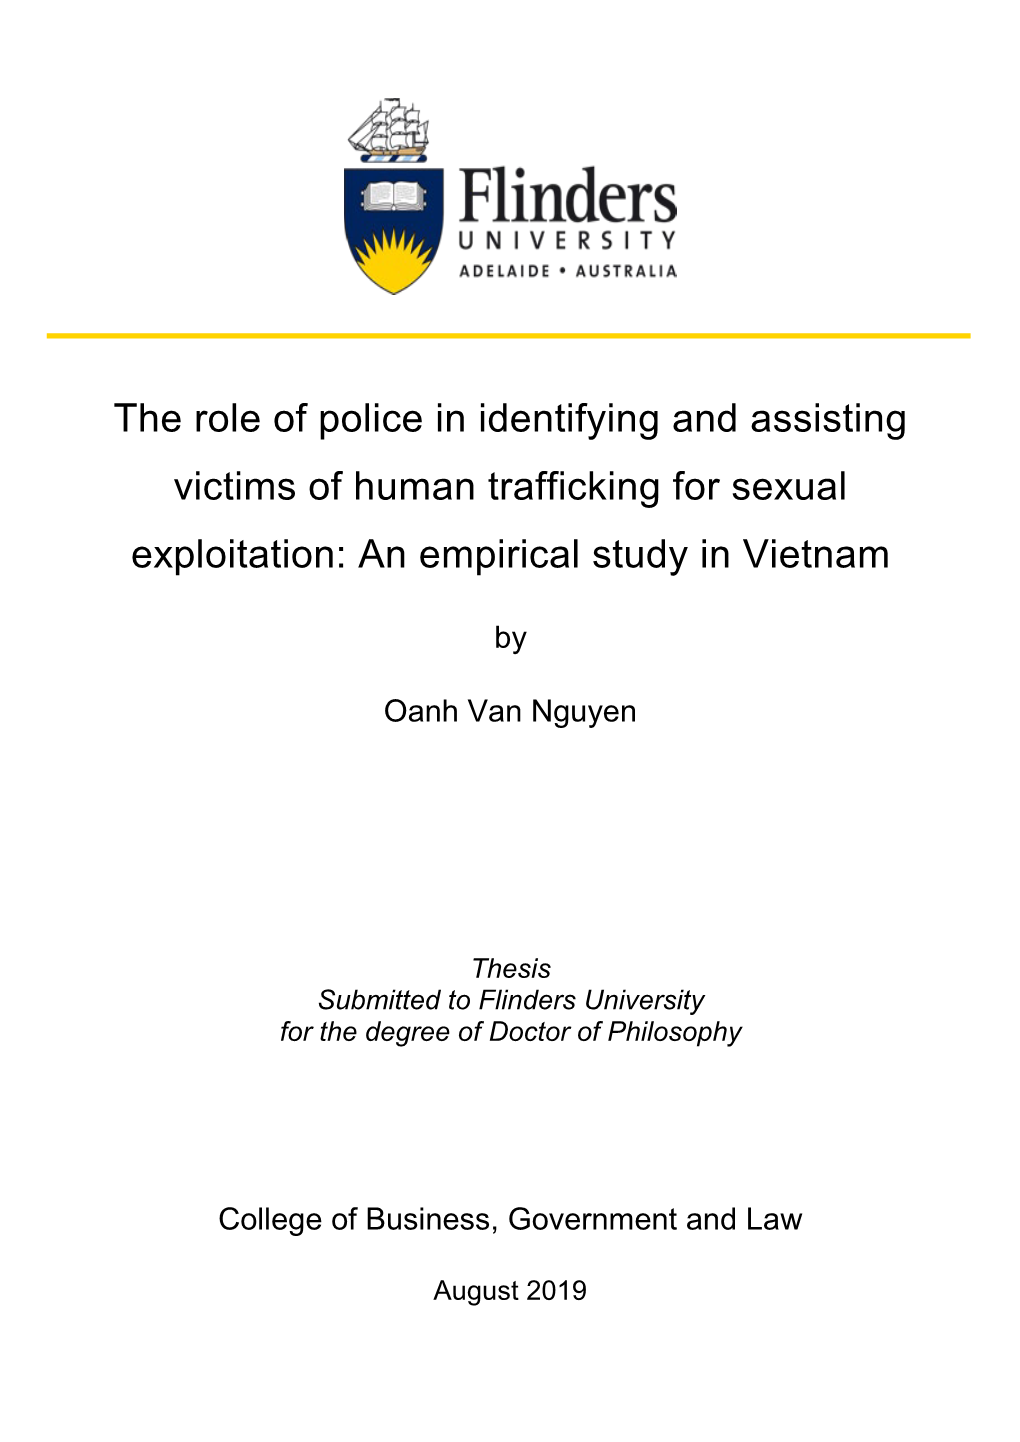 The Role of Police in Identifying and Assisting Victims of Human Trafficking for Sexual Exploitation: an Empirical Study in Vietnam